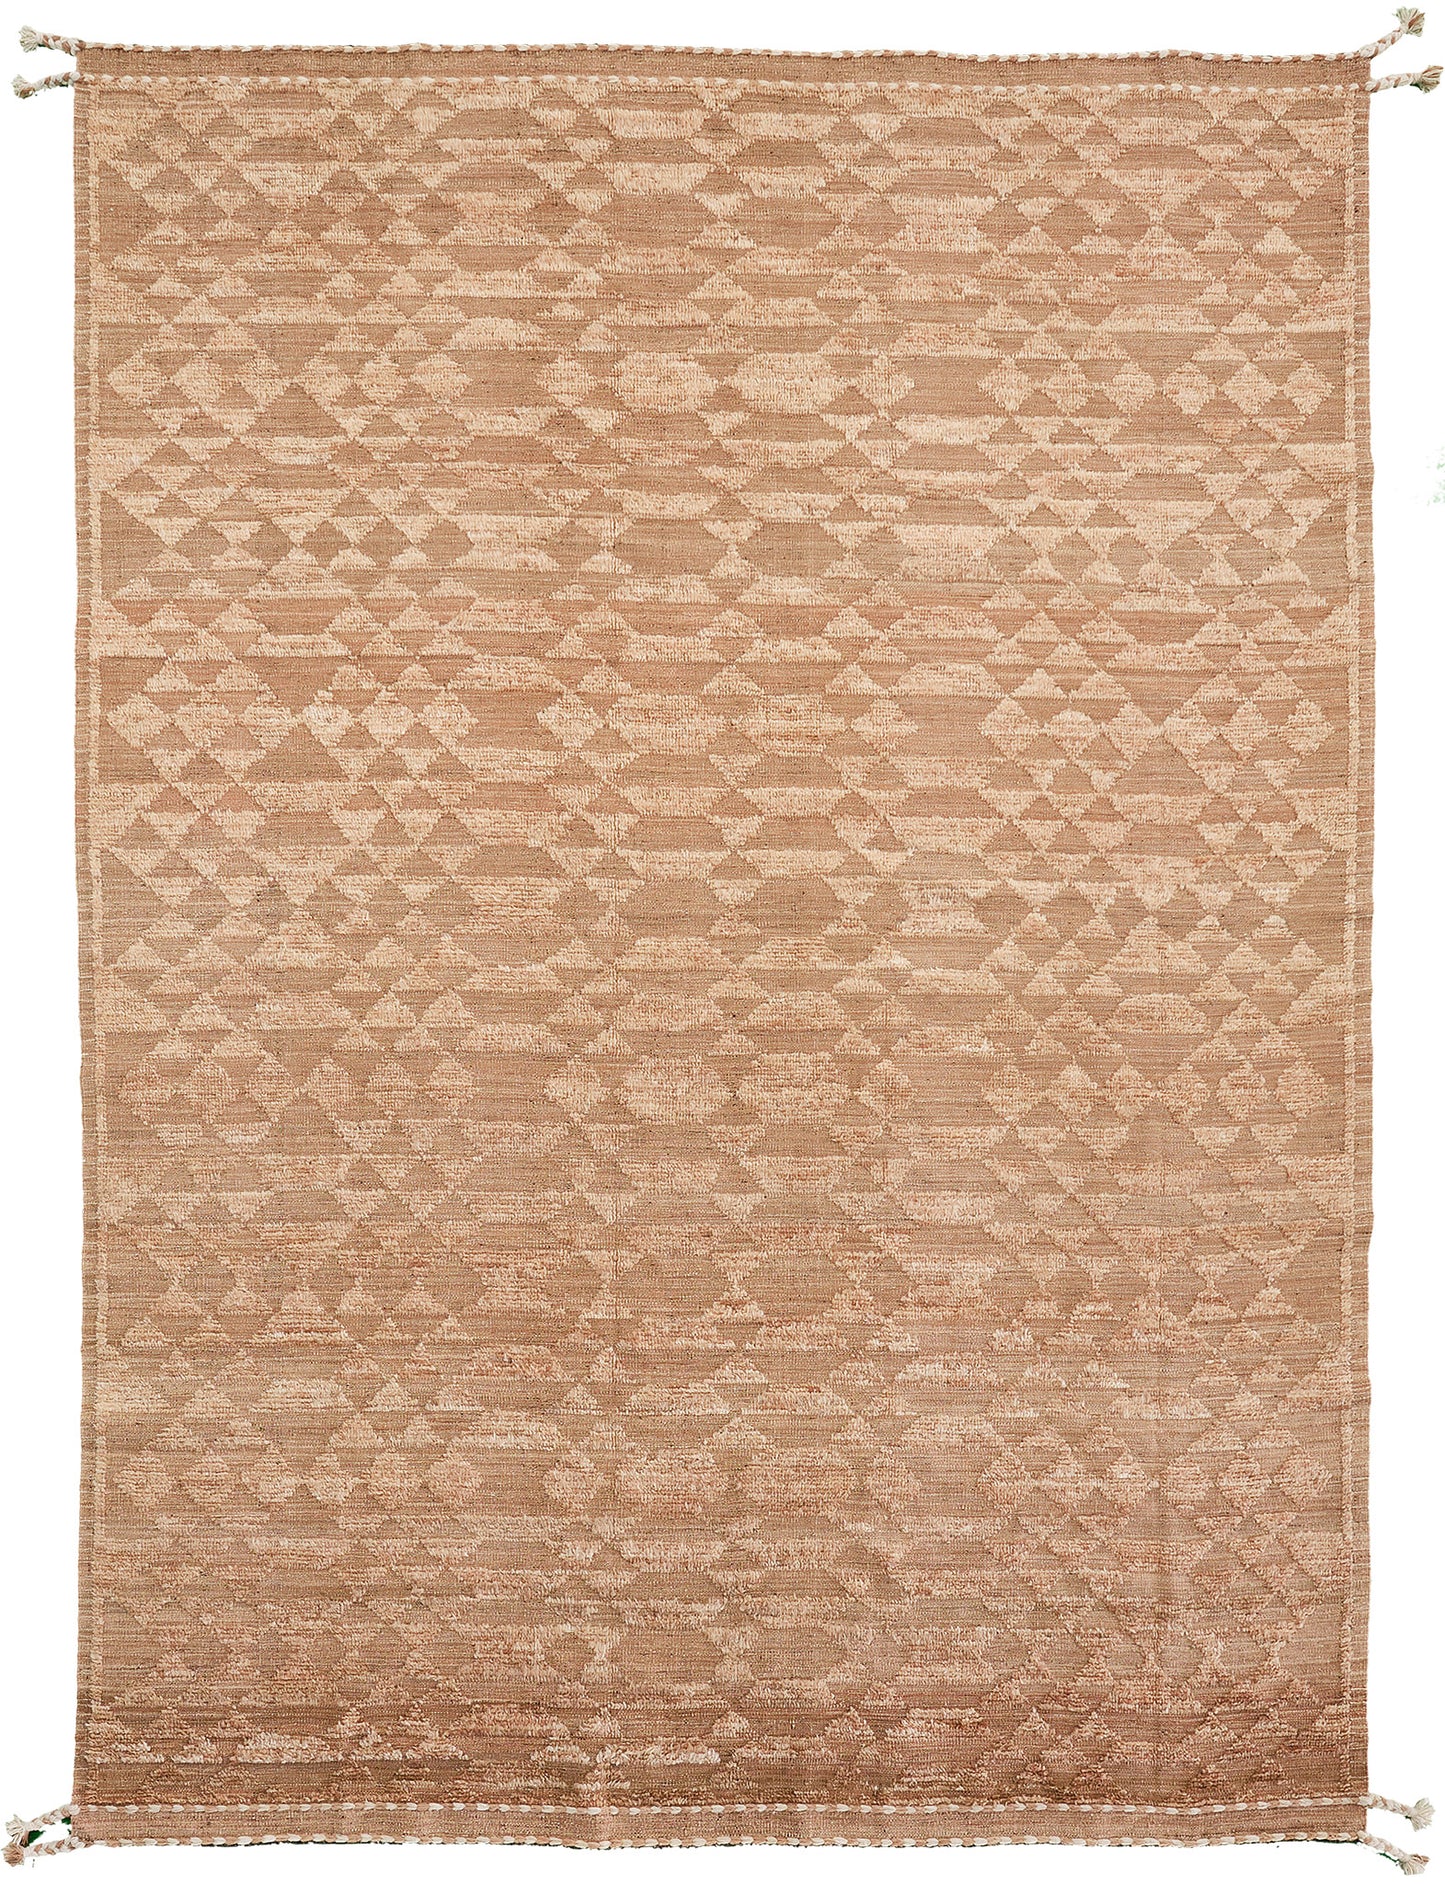 Modern Rug Image 8674 Namidica, Nomad Collection